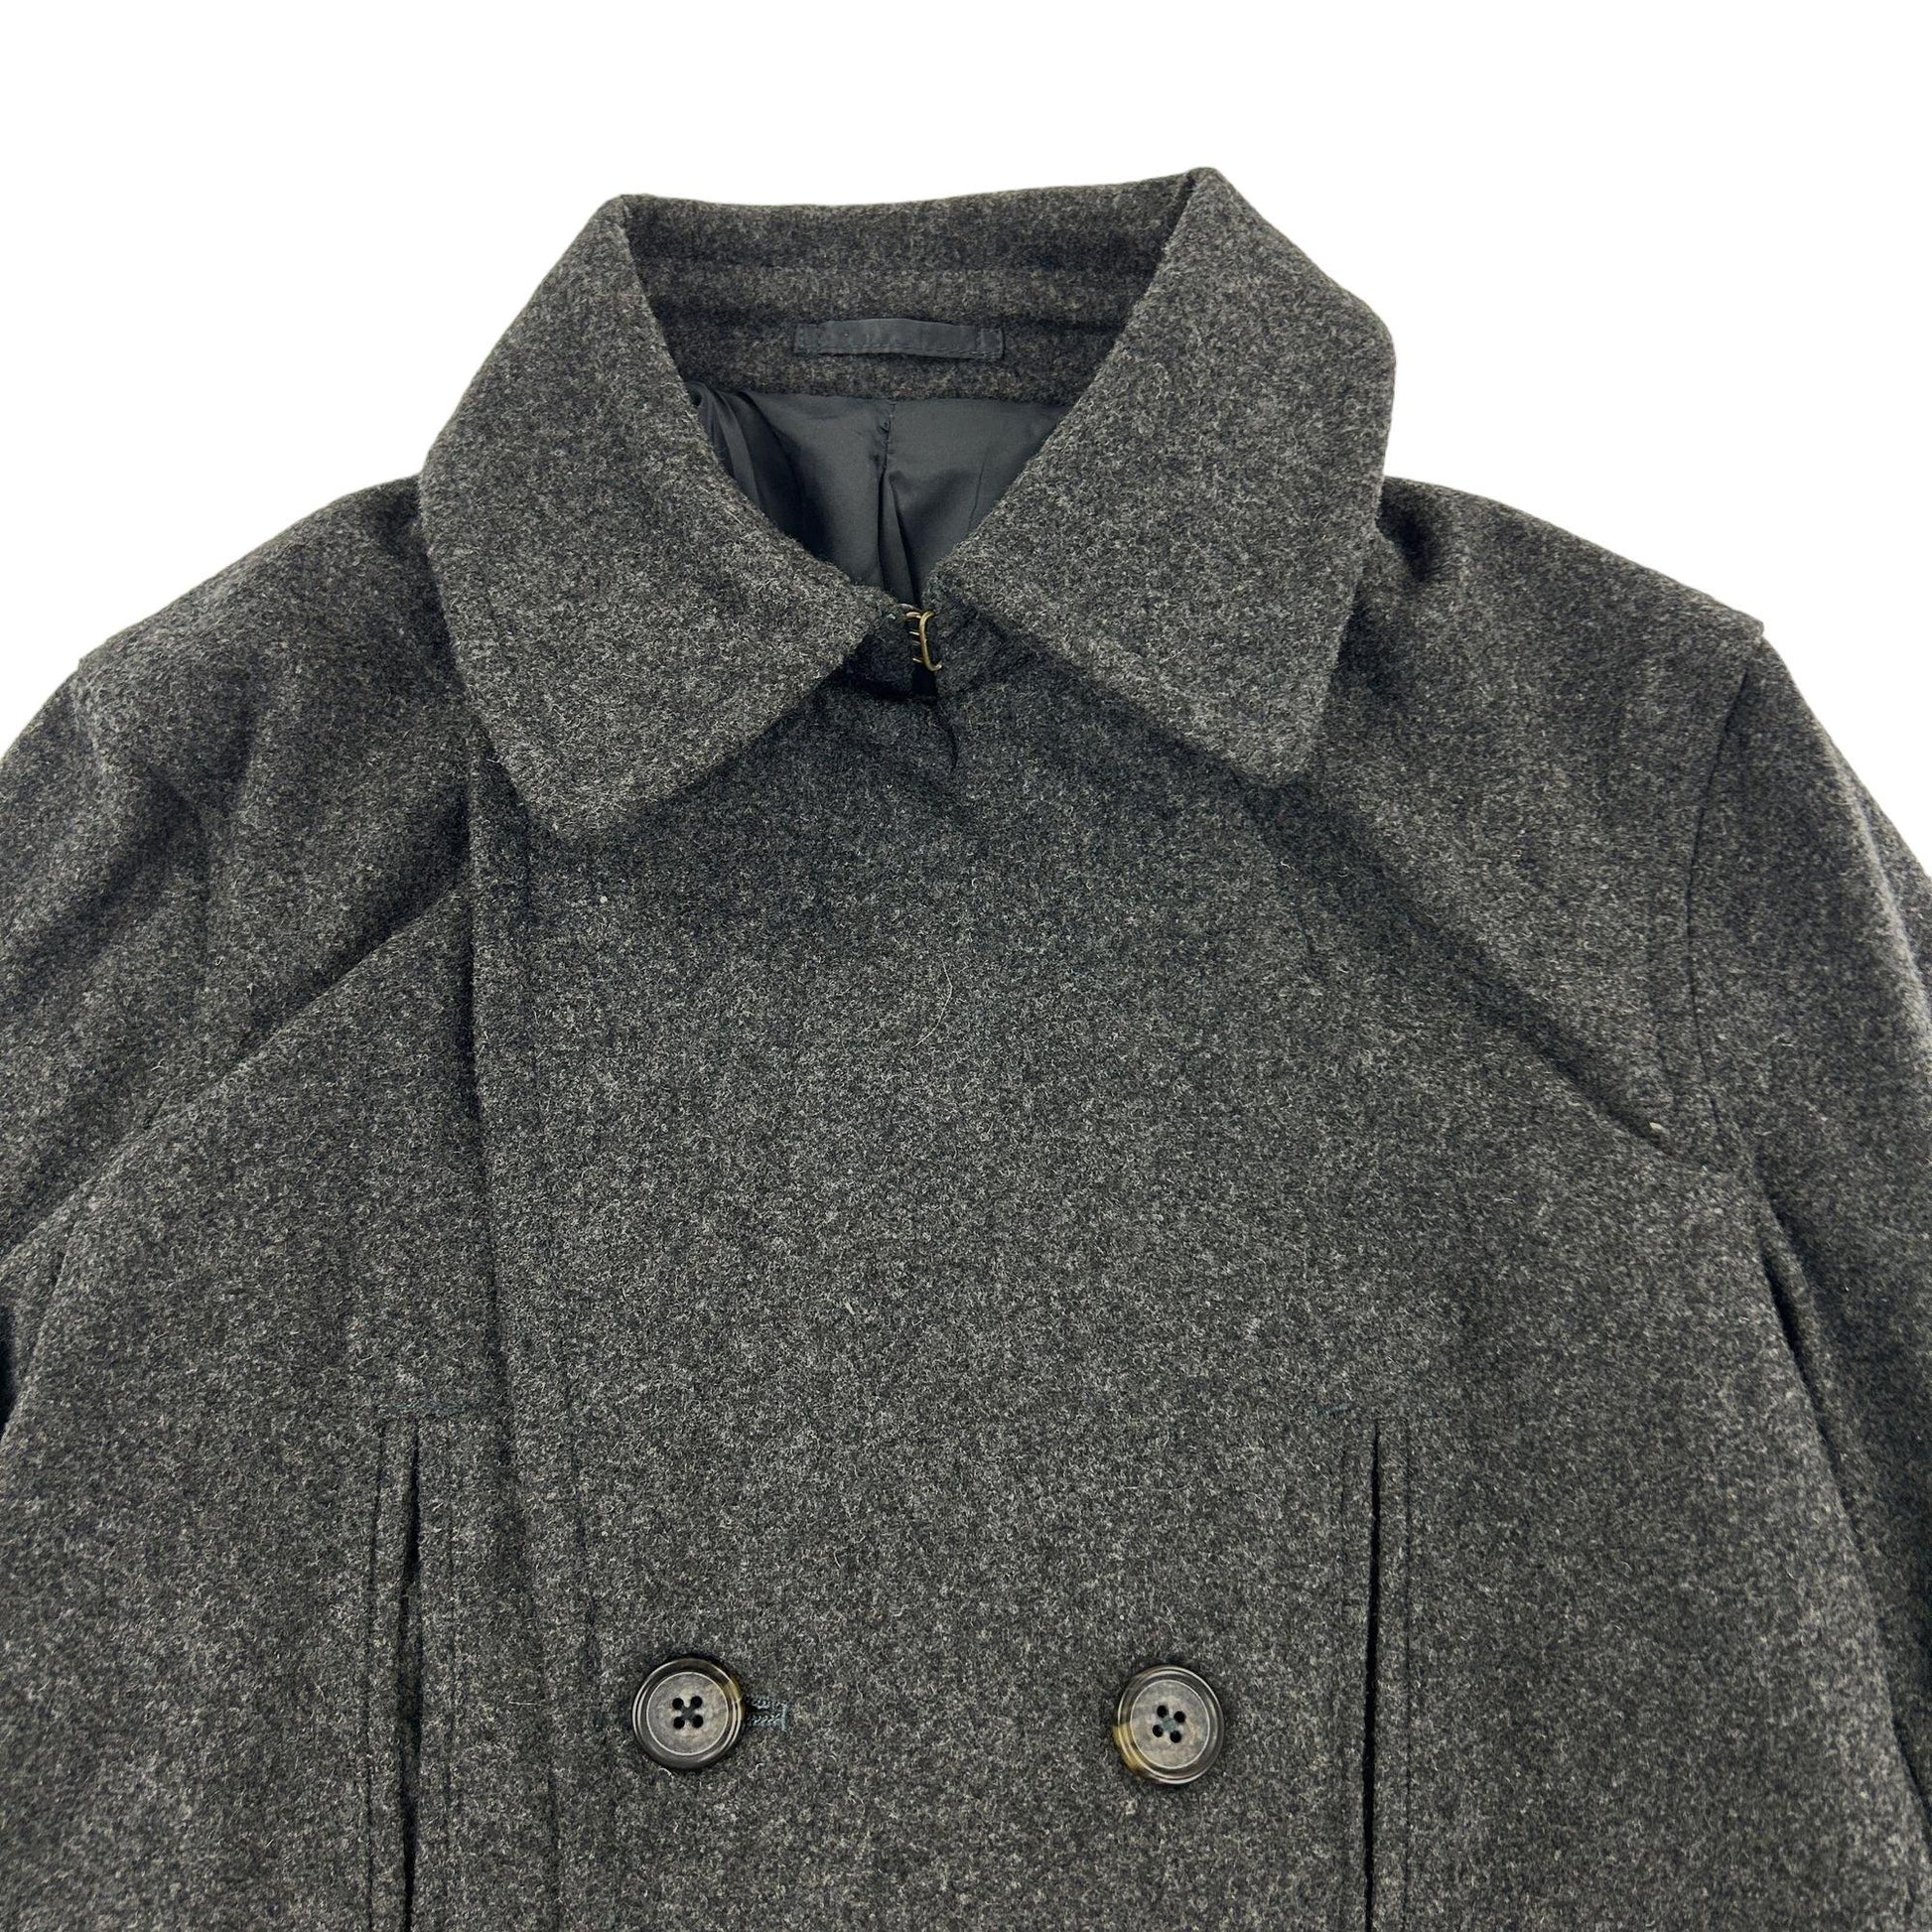 Vintage PPFM Double Breasted Peacoat Style Wool Blend Coat Size M - Known Source